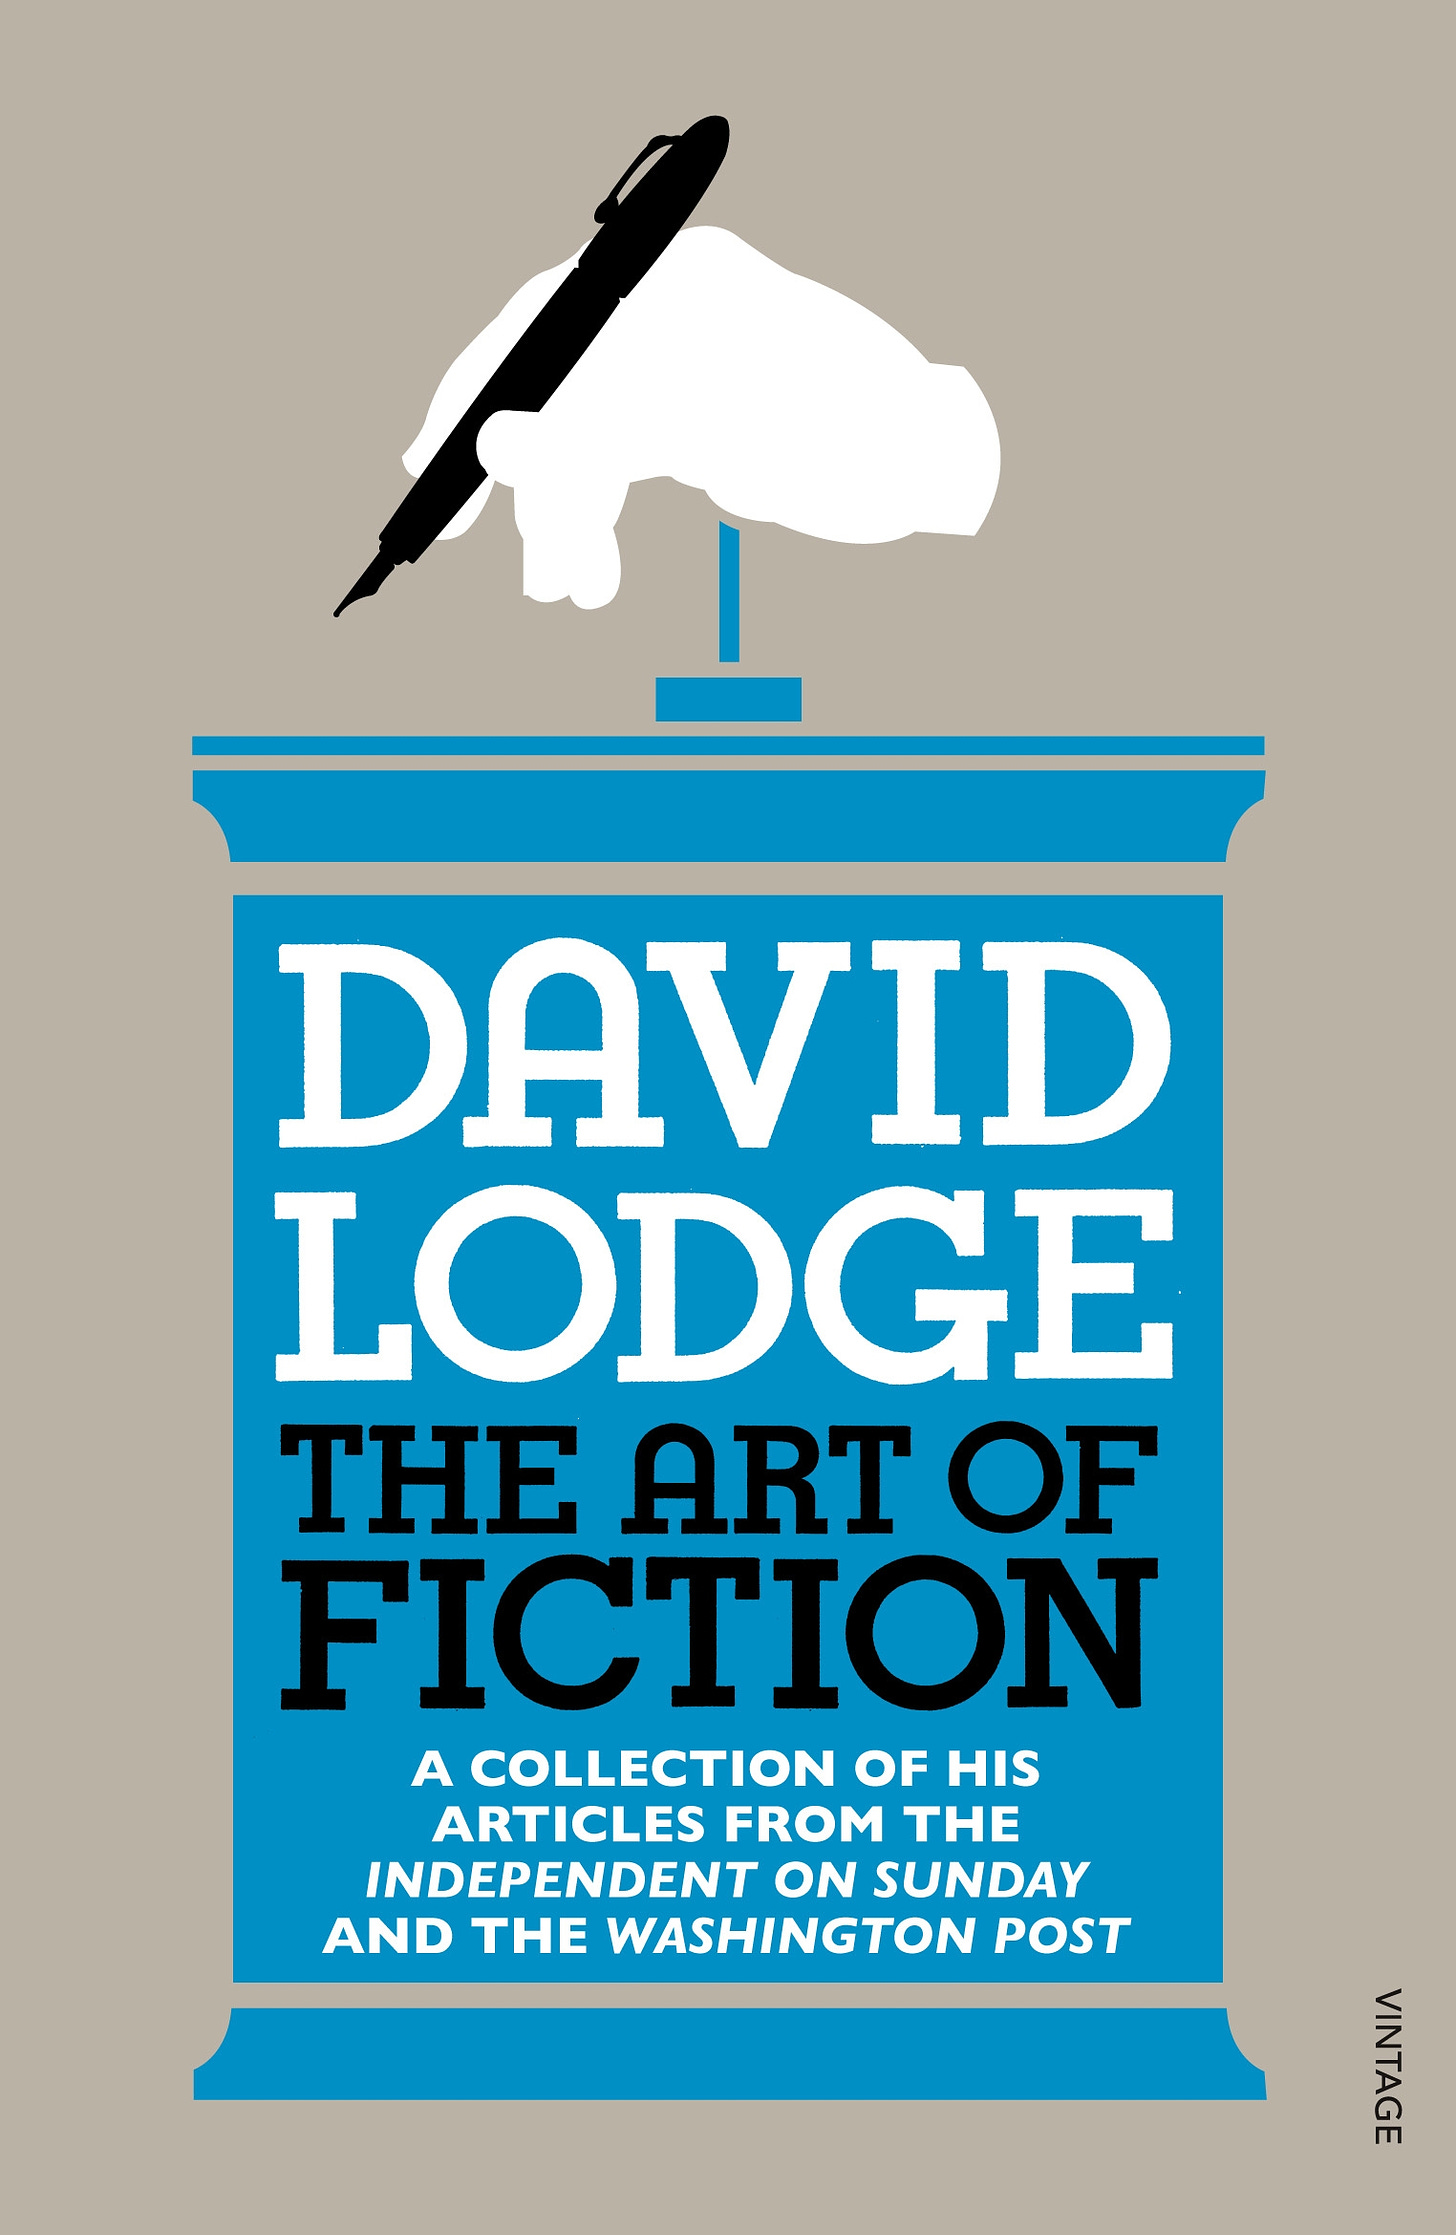 The Art of Fiction by David Lodge - Penguin Books New Zealand